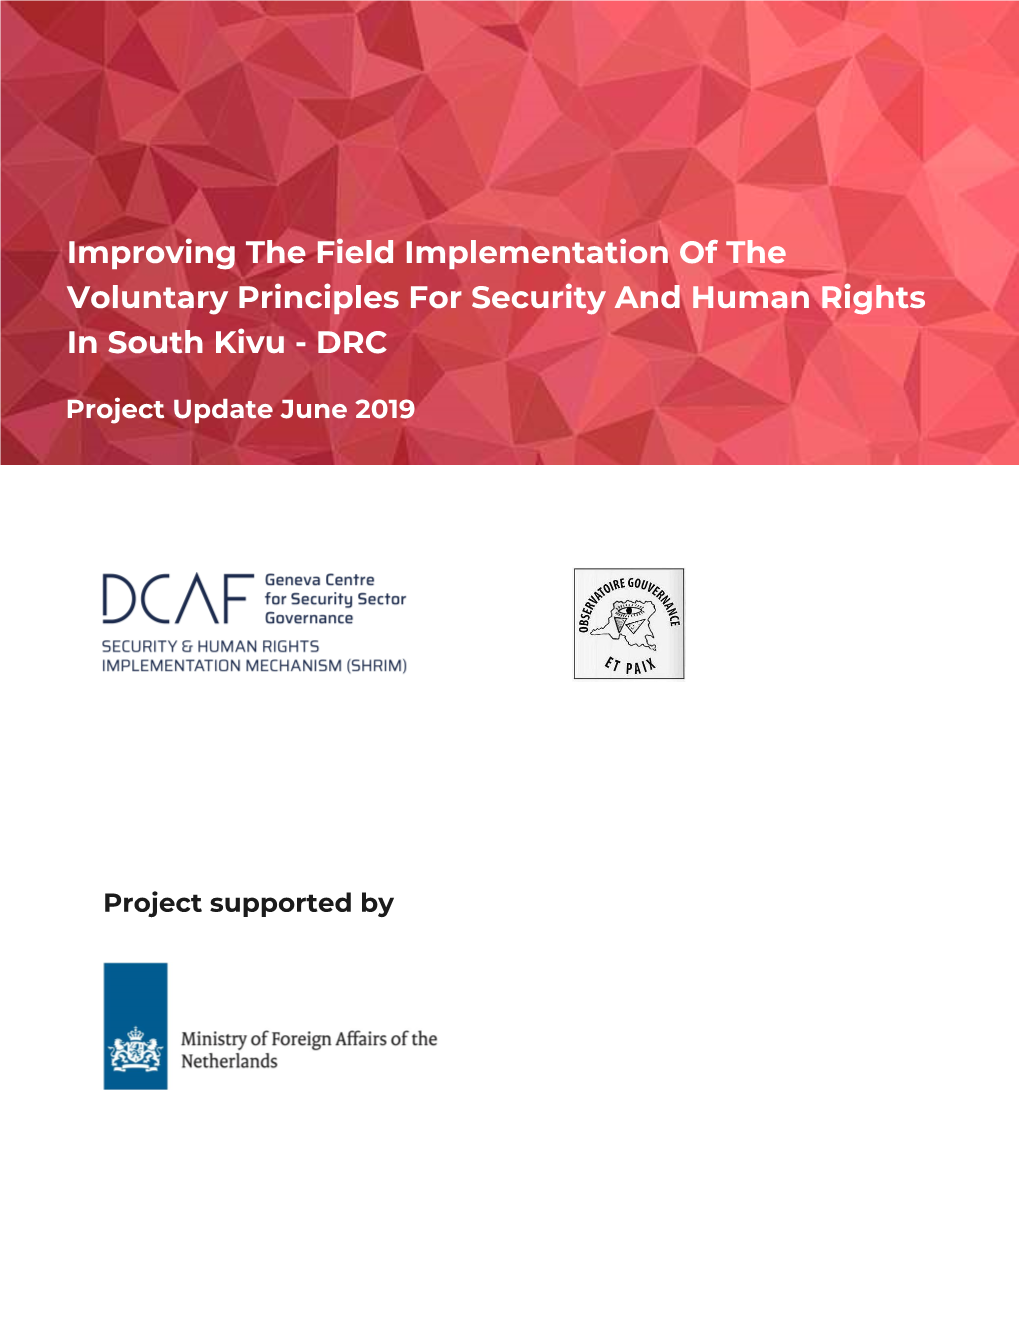 Improving the Field Implementation of the Voluntary Principles for Security and Human Rights in South Kivu - DRC